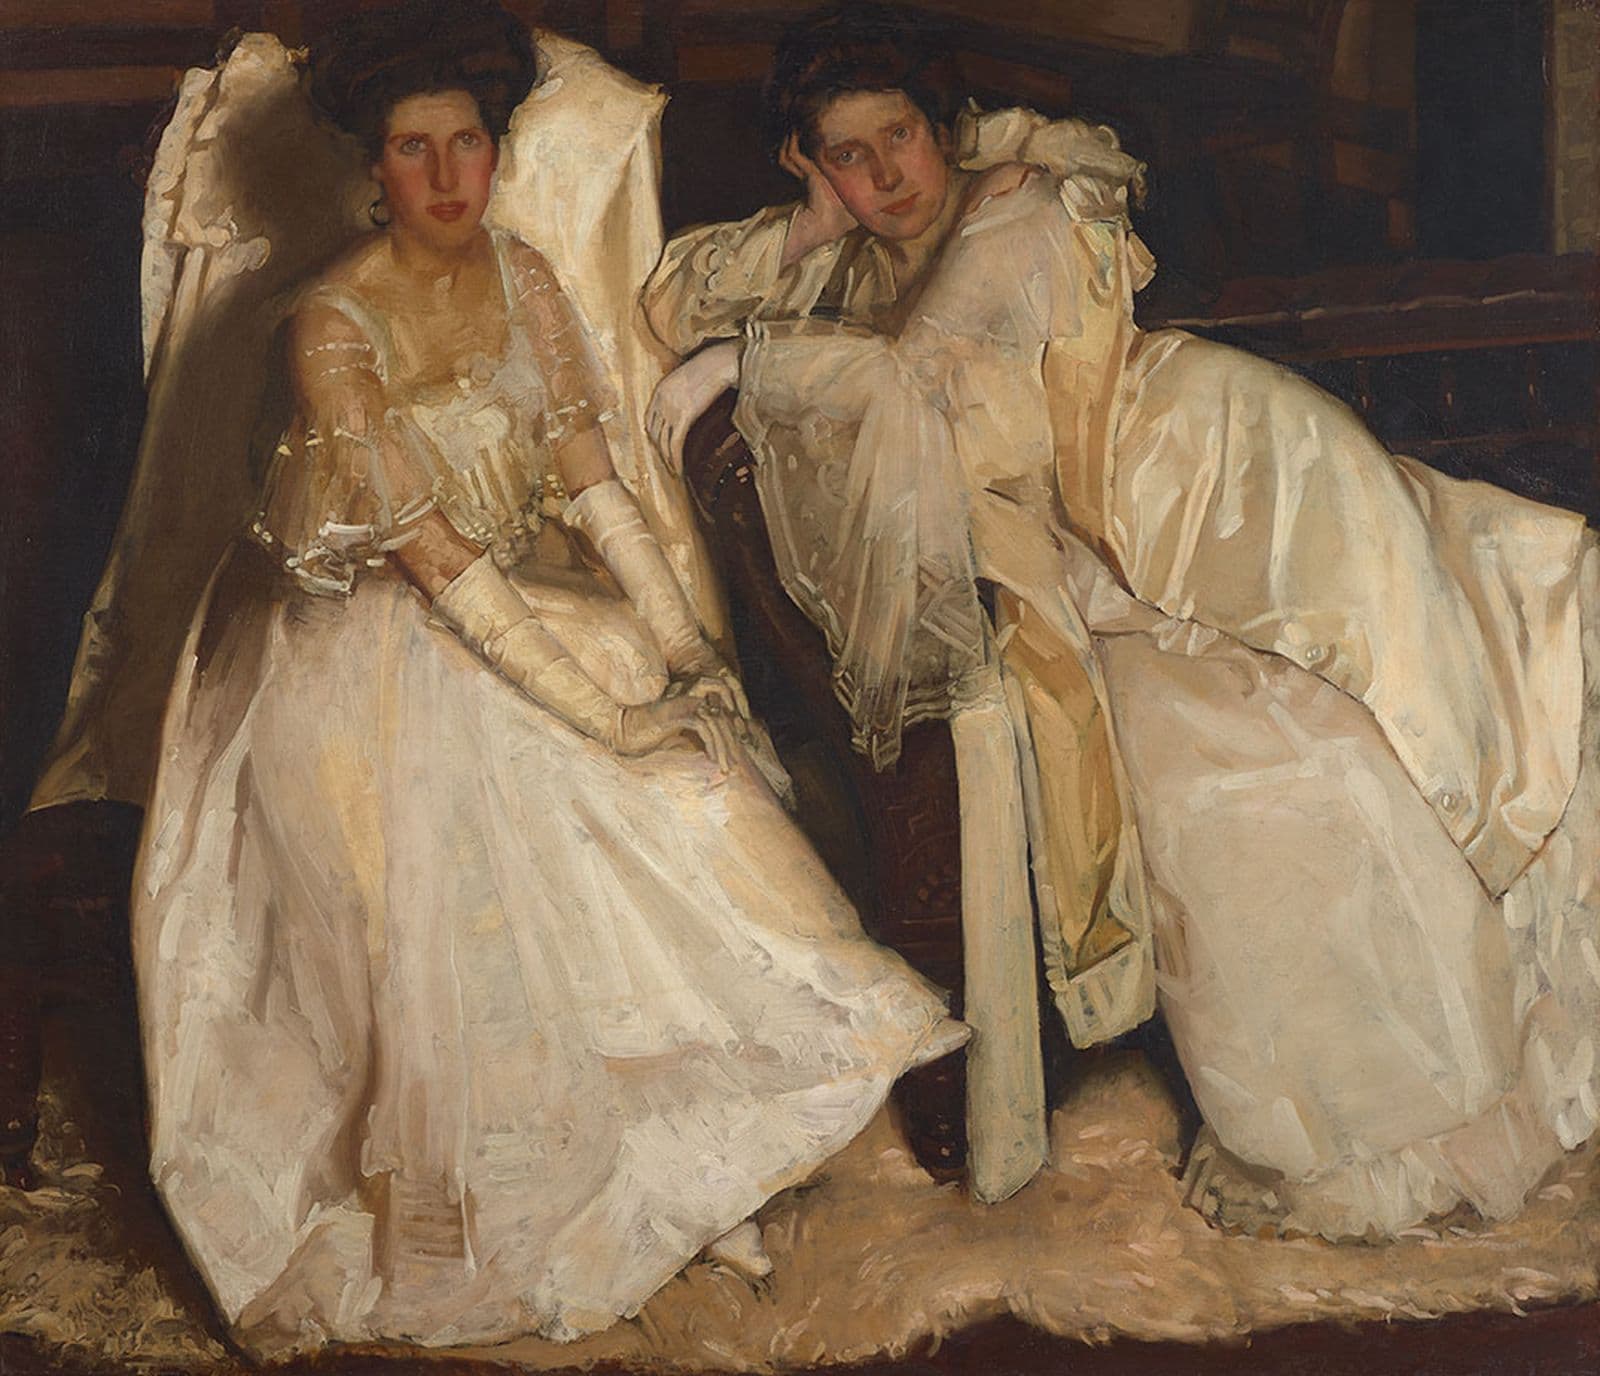 Two ladies dressed in white lounge on chairs